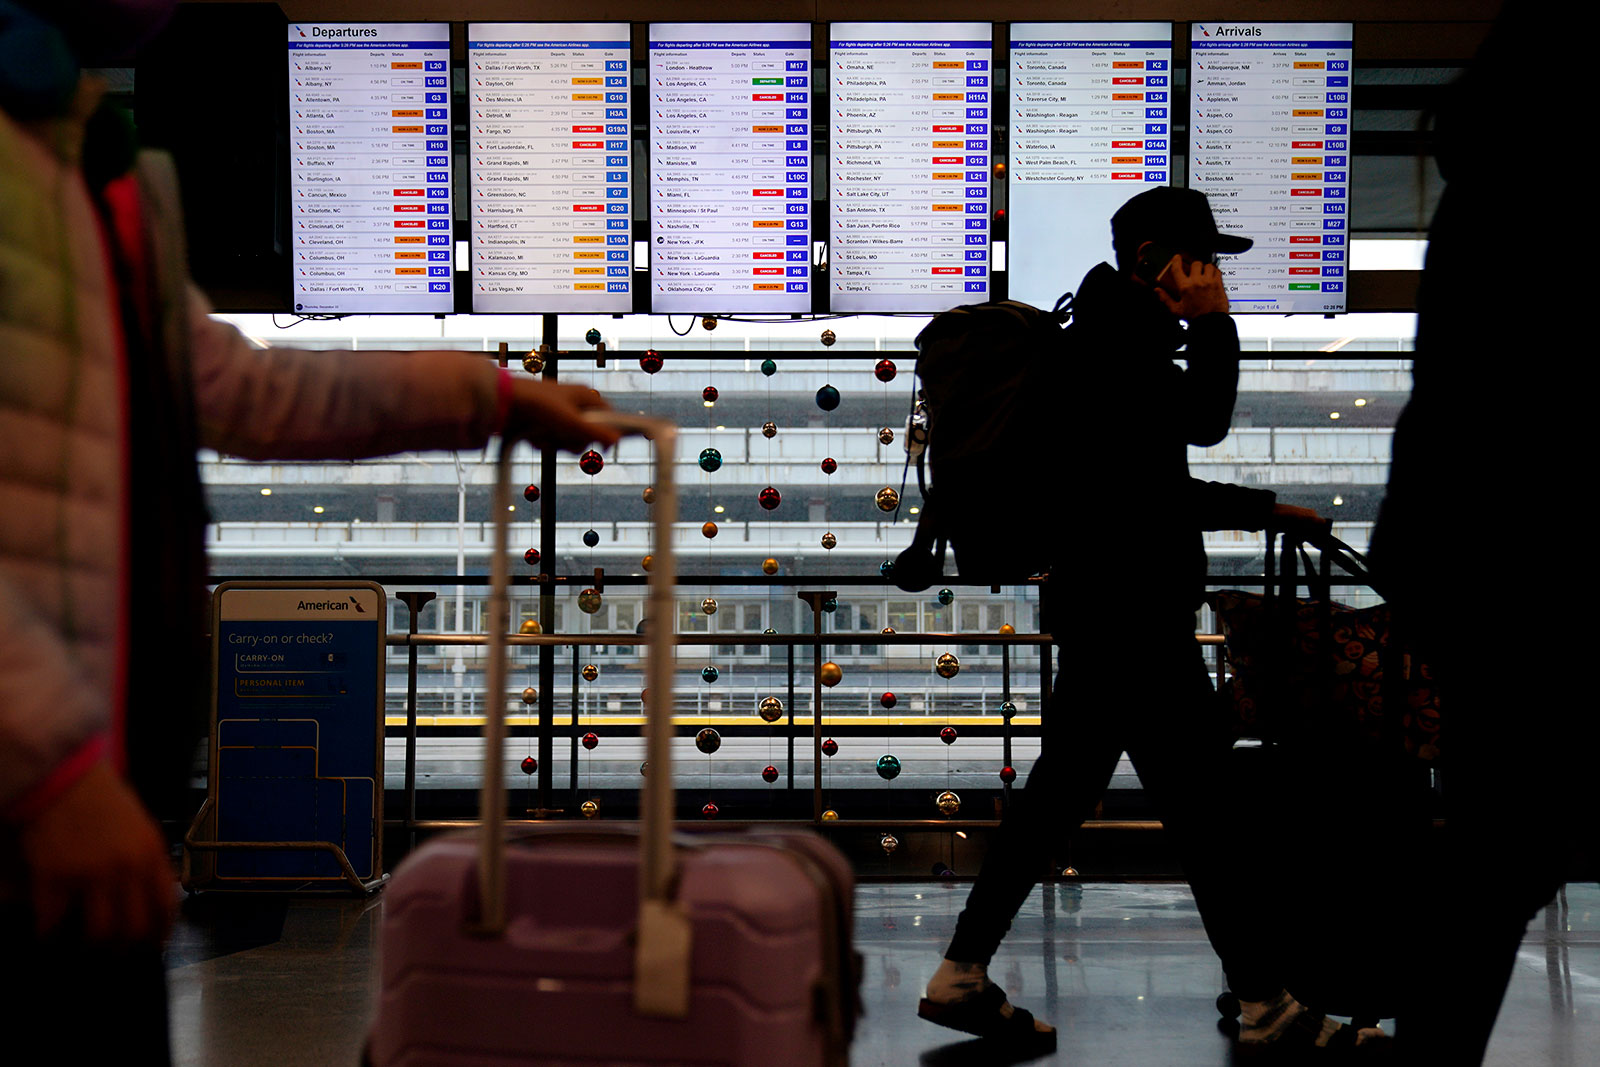 A traveler walks in front of a flight information screen at Chicago's O'Hare International Airport on Dec. 22.